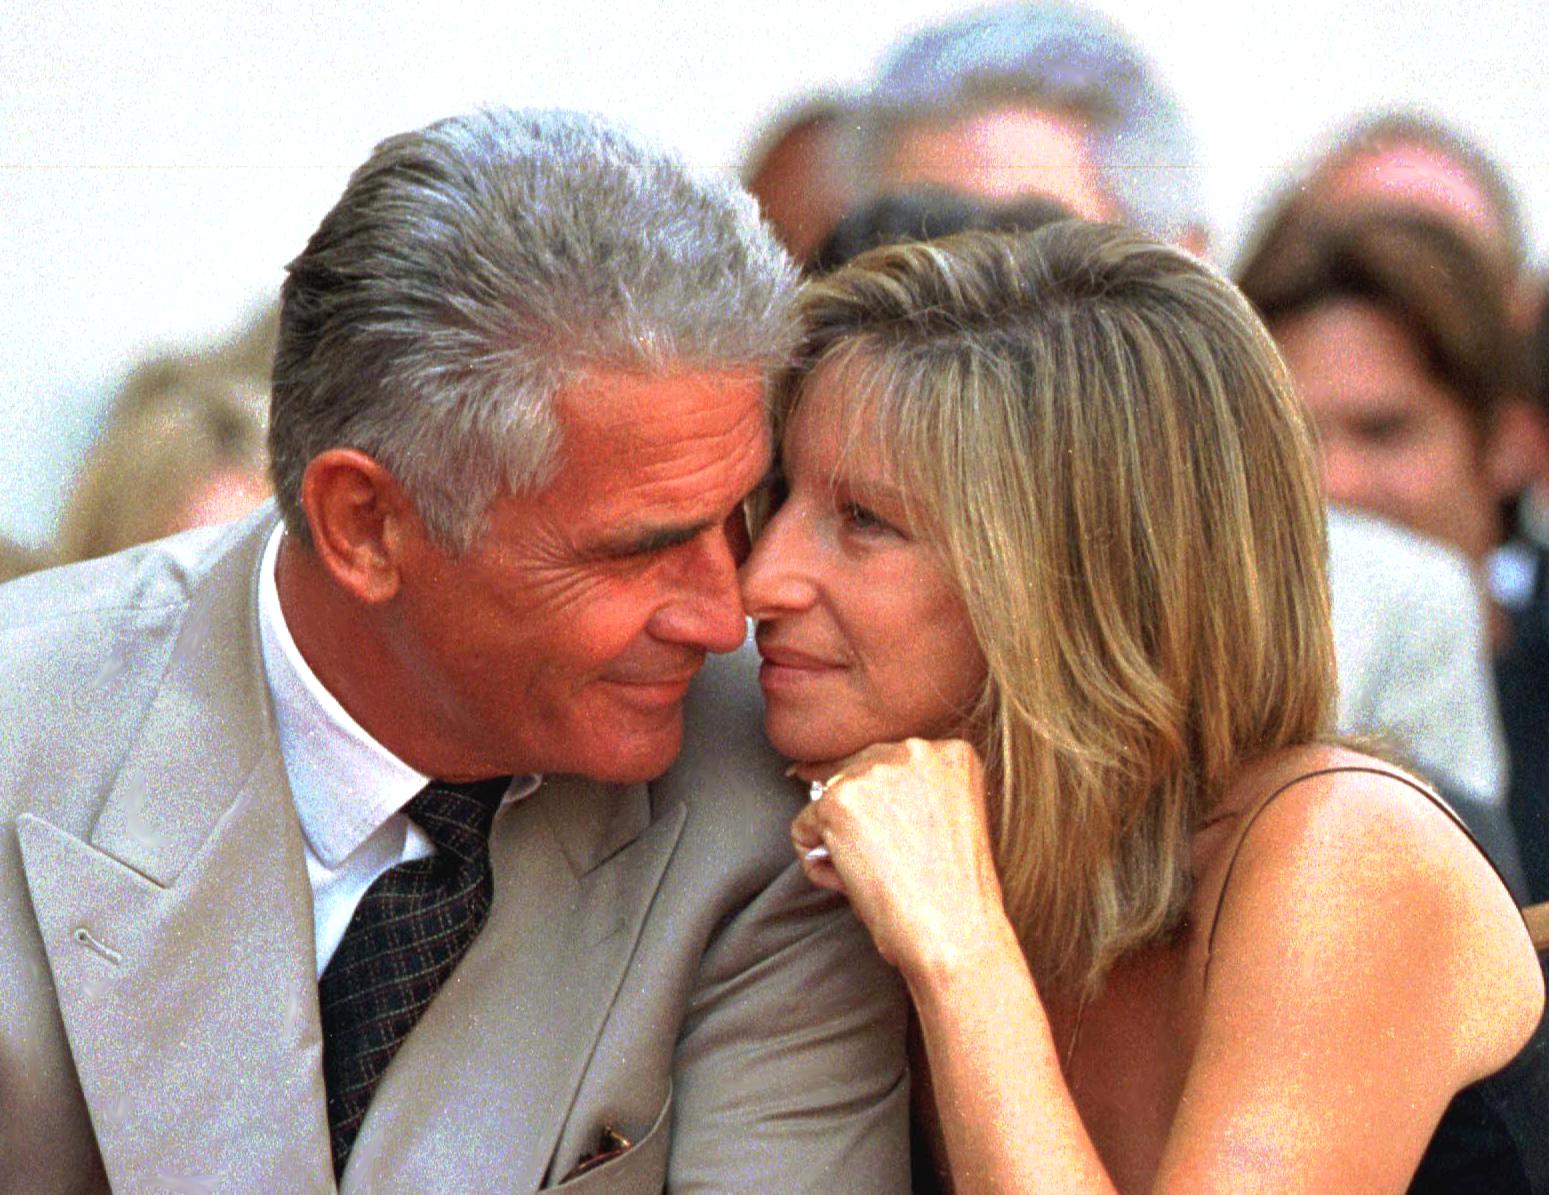 James Brolin and Barbara Streisand in Hollywood in 1998. | Source: Getty Images